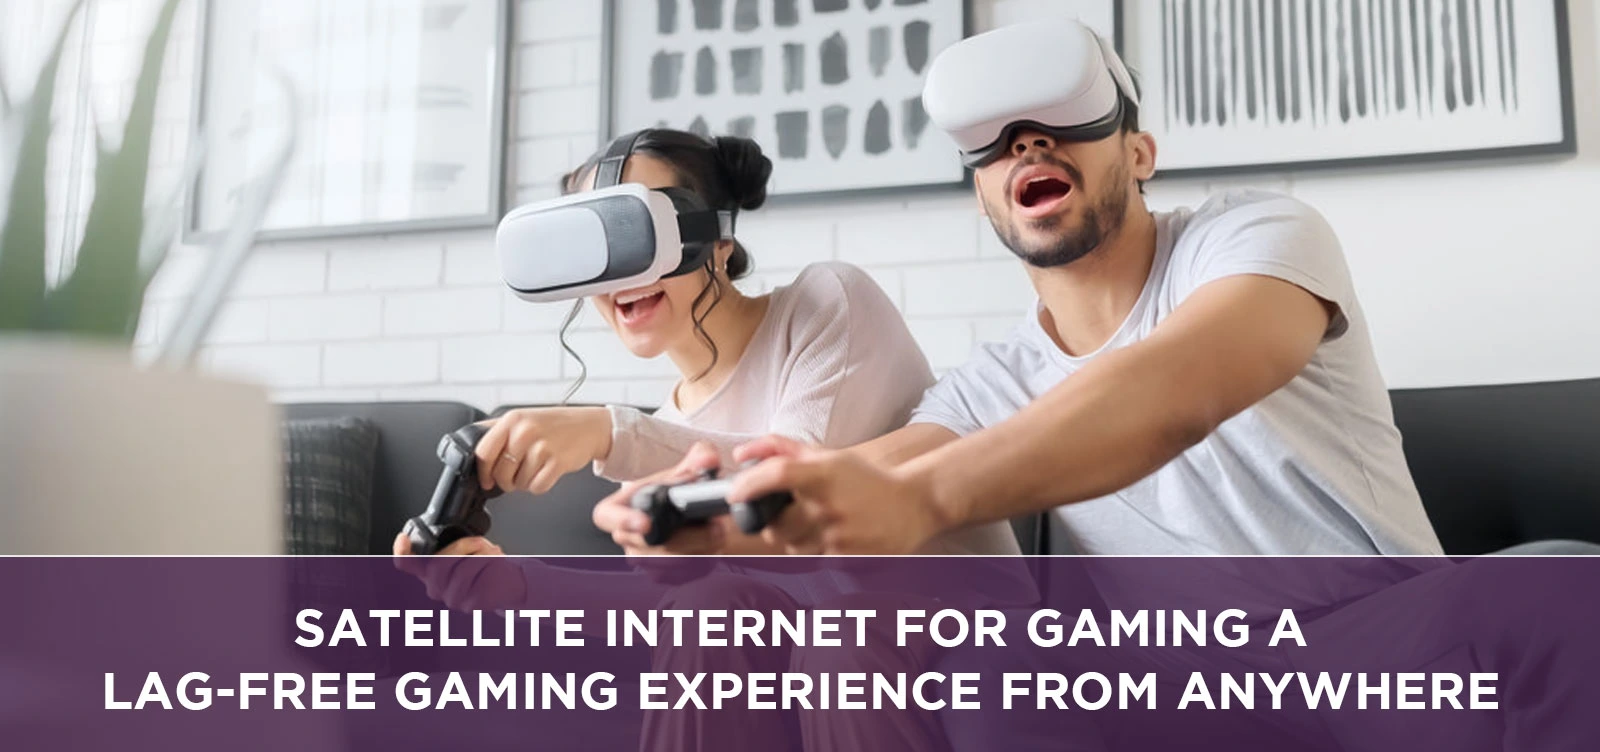 Satellite Internet for Gaming A Lag-Free Gaming Experience from Anywhere